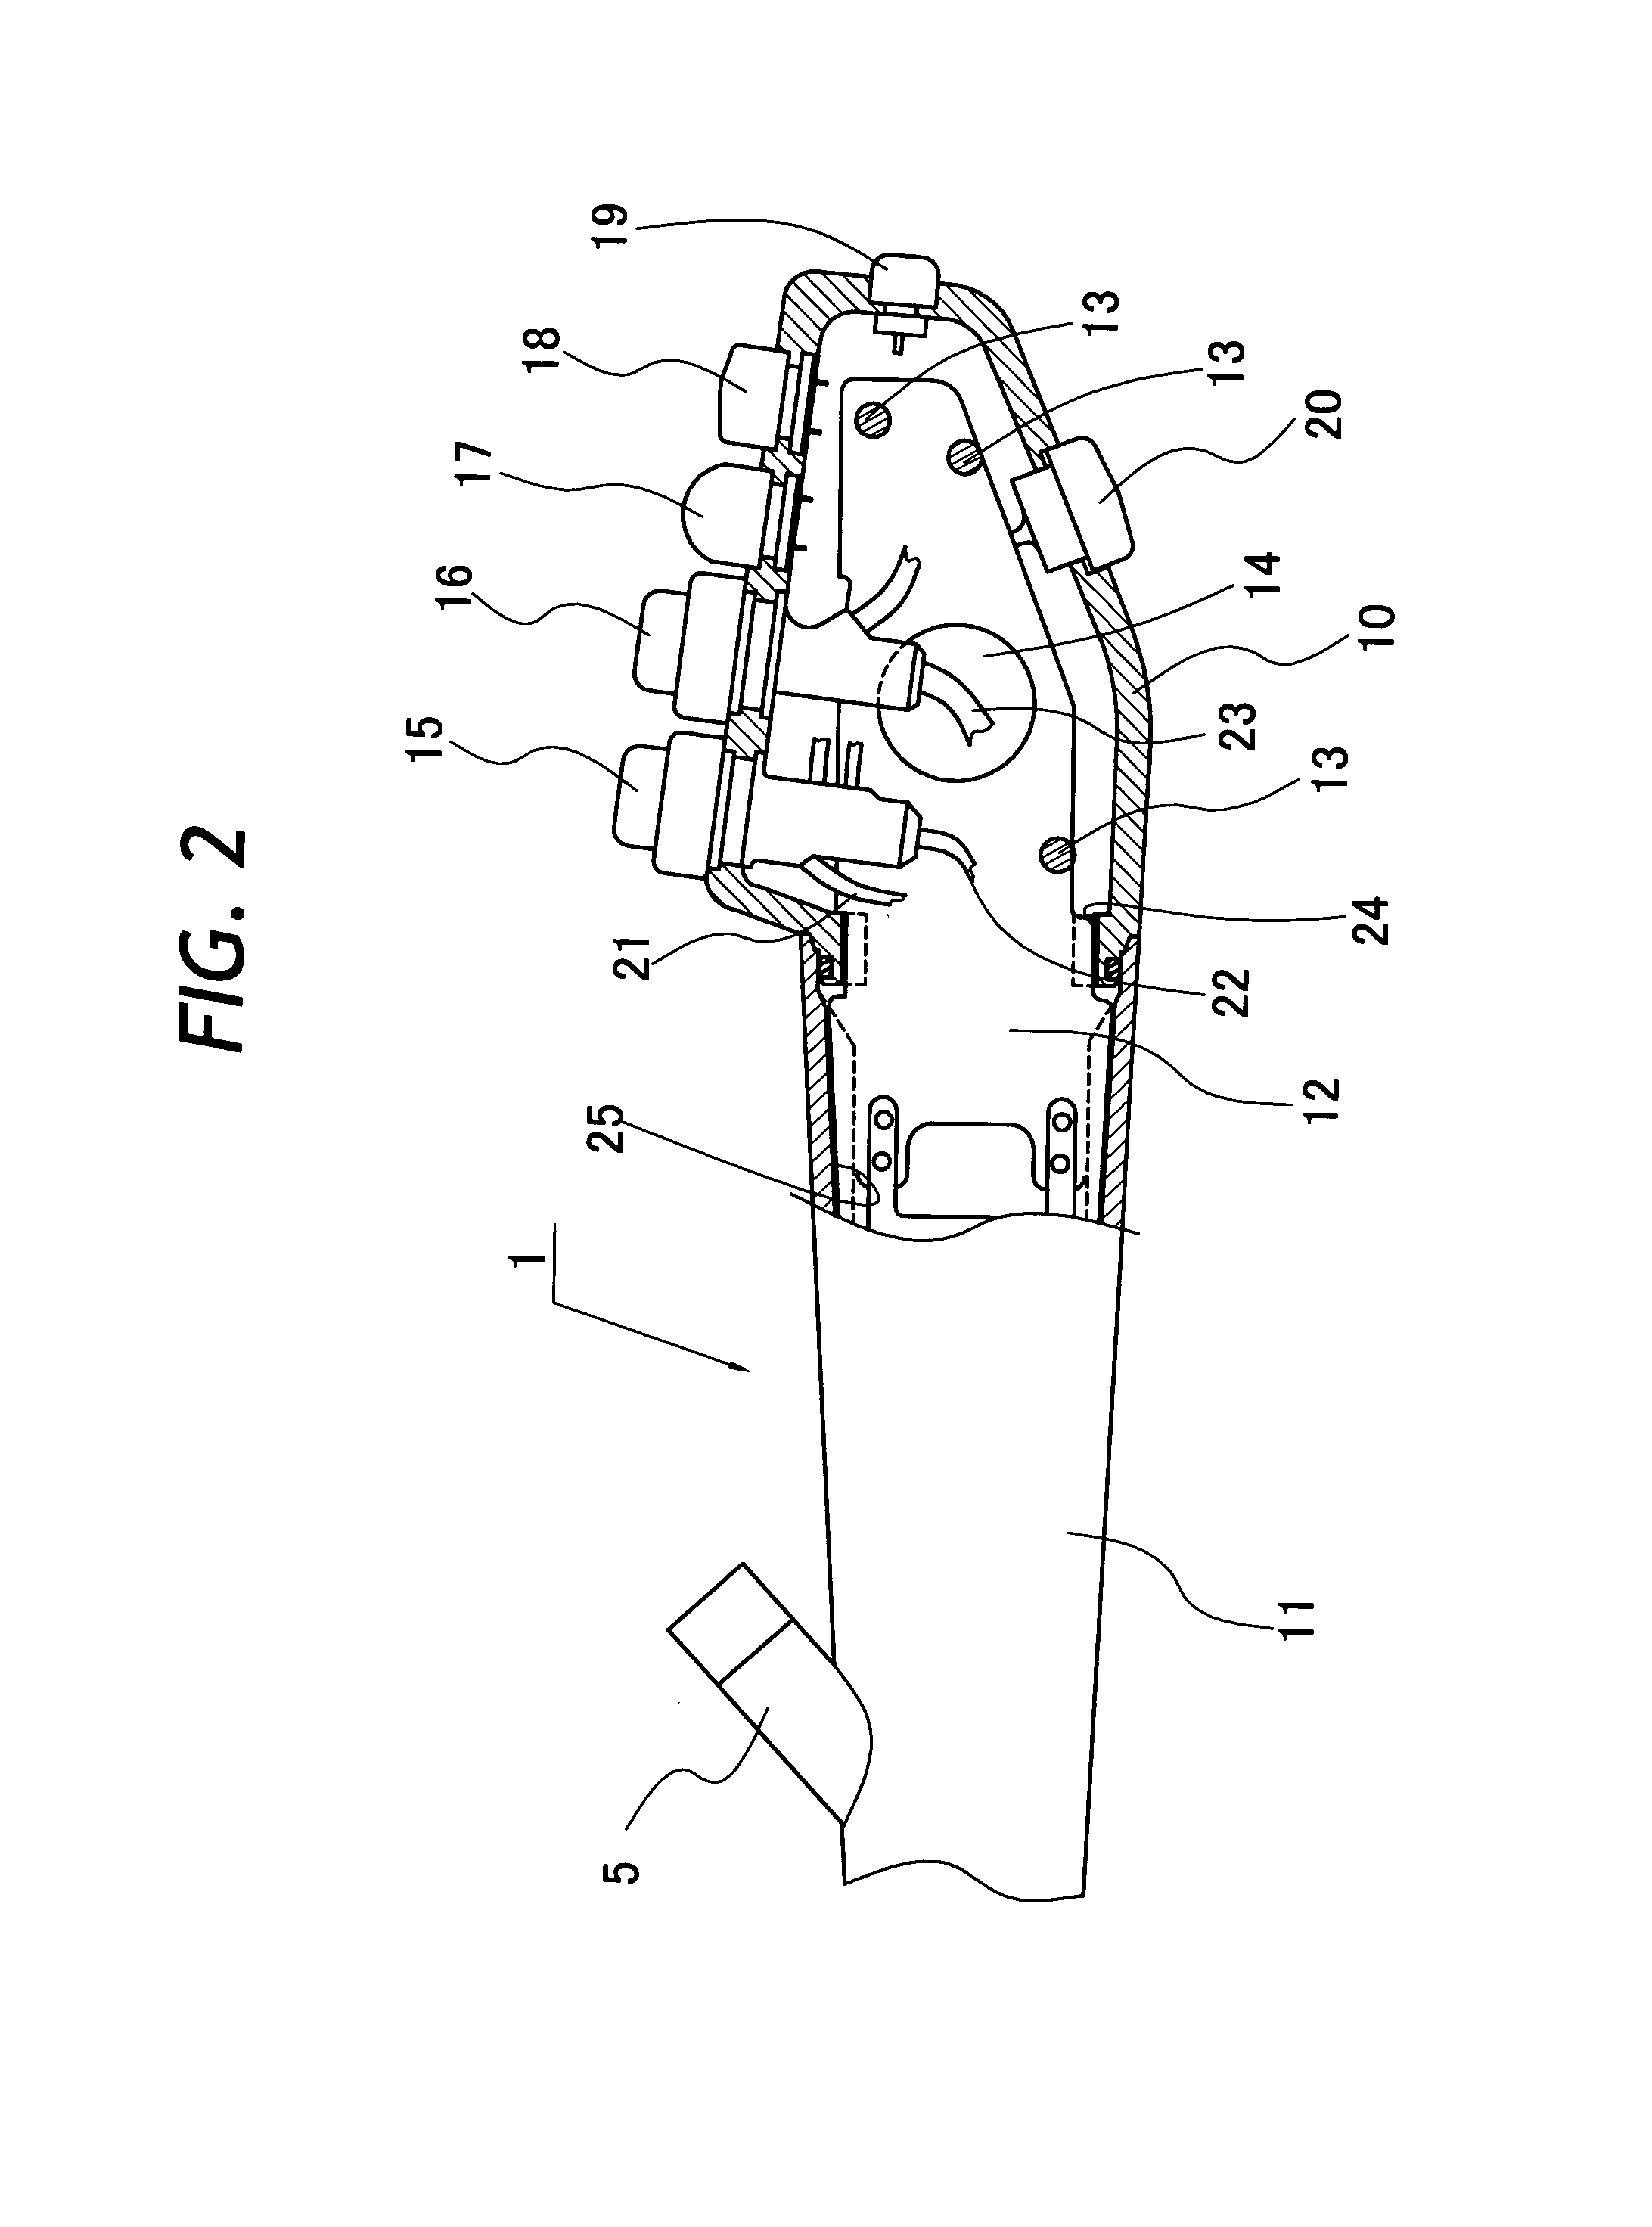 Anti-twist casing for endoscopic manipulating head assembly